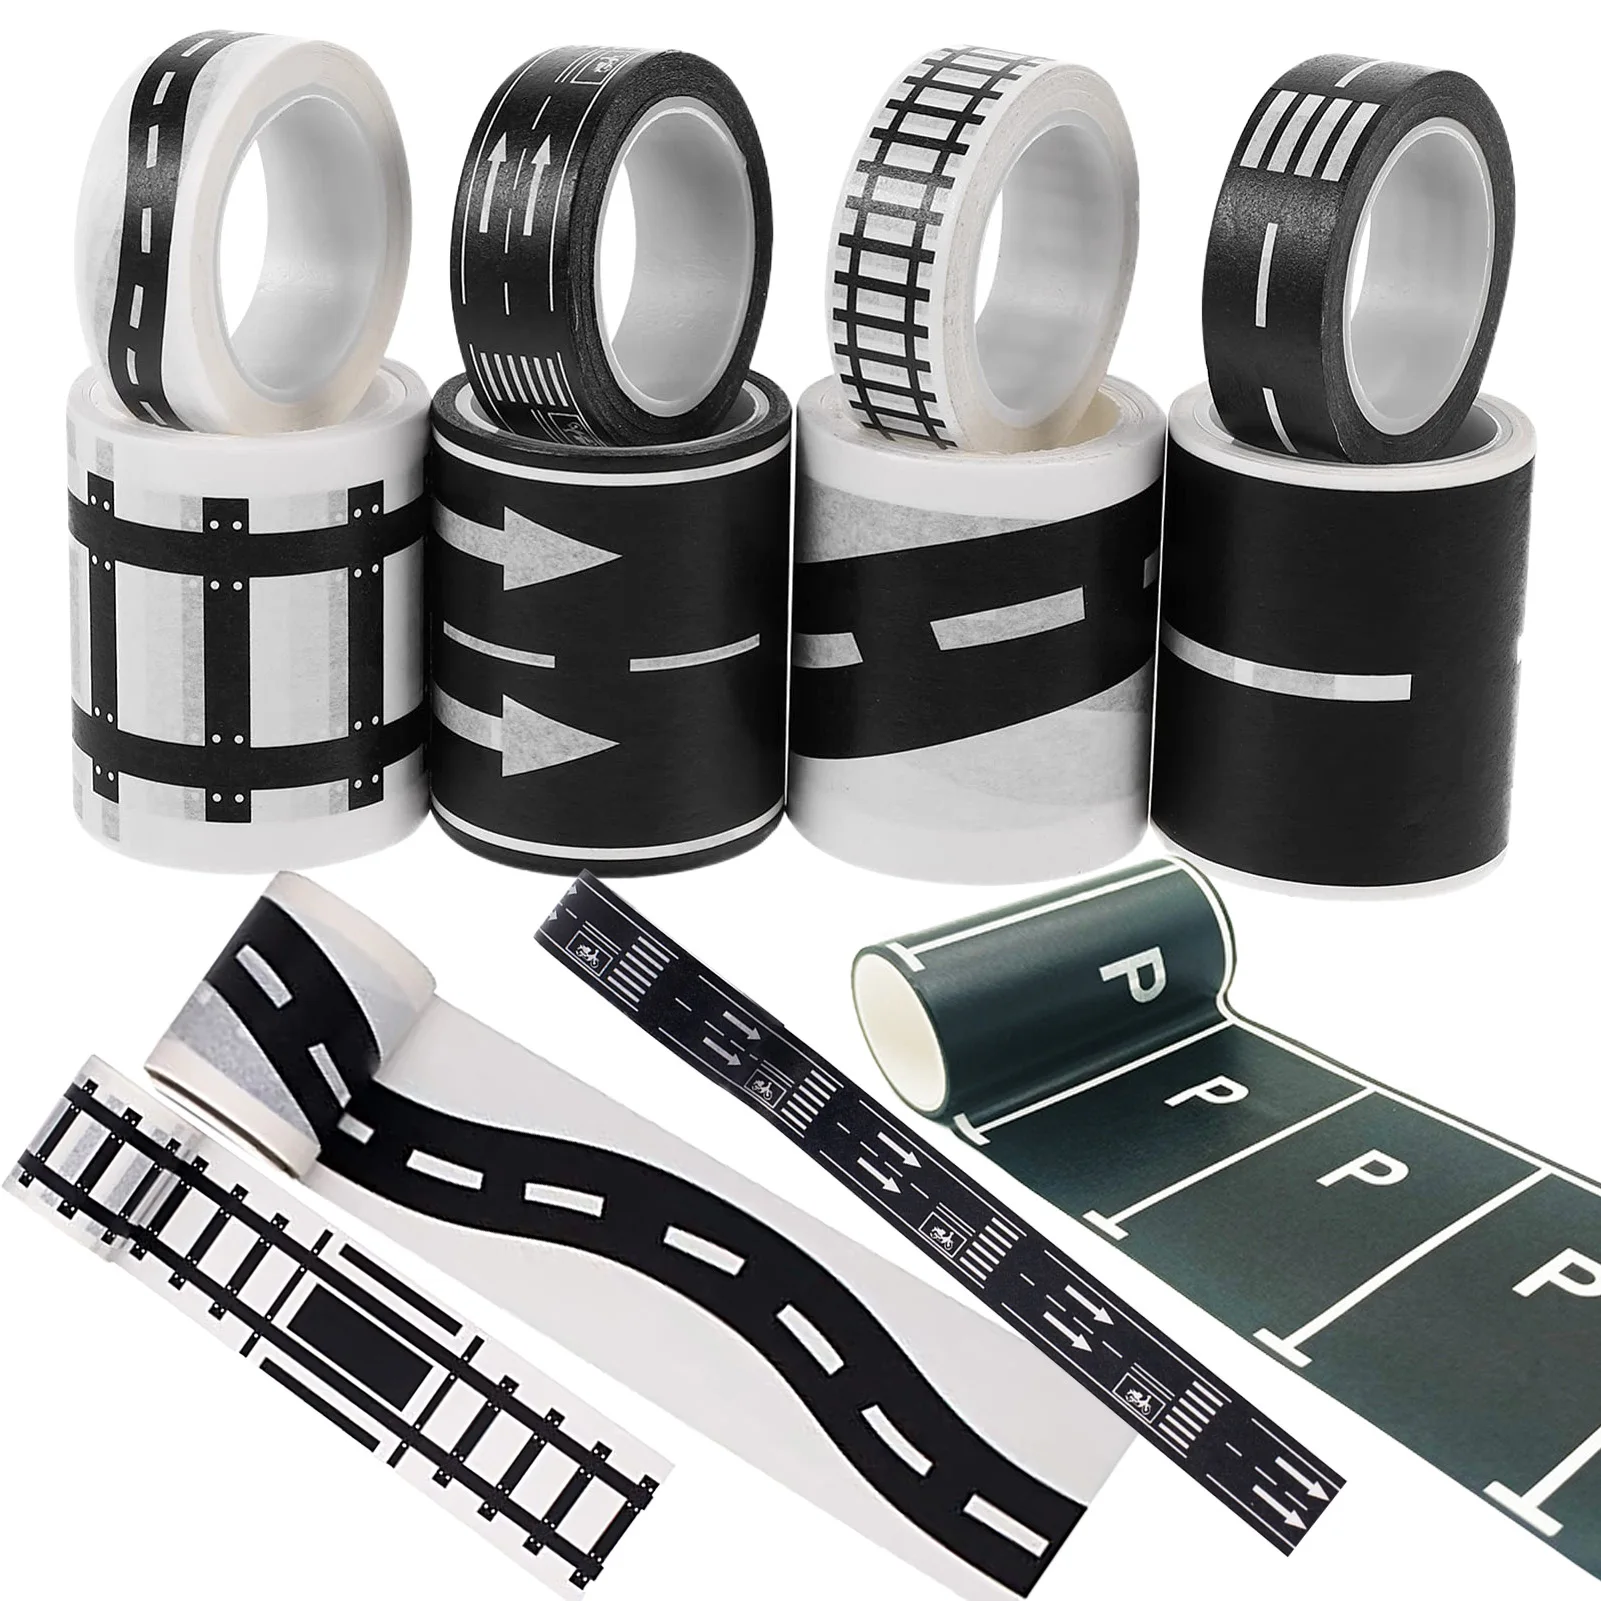 Race Car Children Birthday Gifts Highway Washi Tape Road Car Track Train Sticker Toys Planners Scrapbook Wrapping Black Tape Car